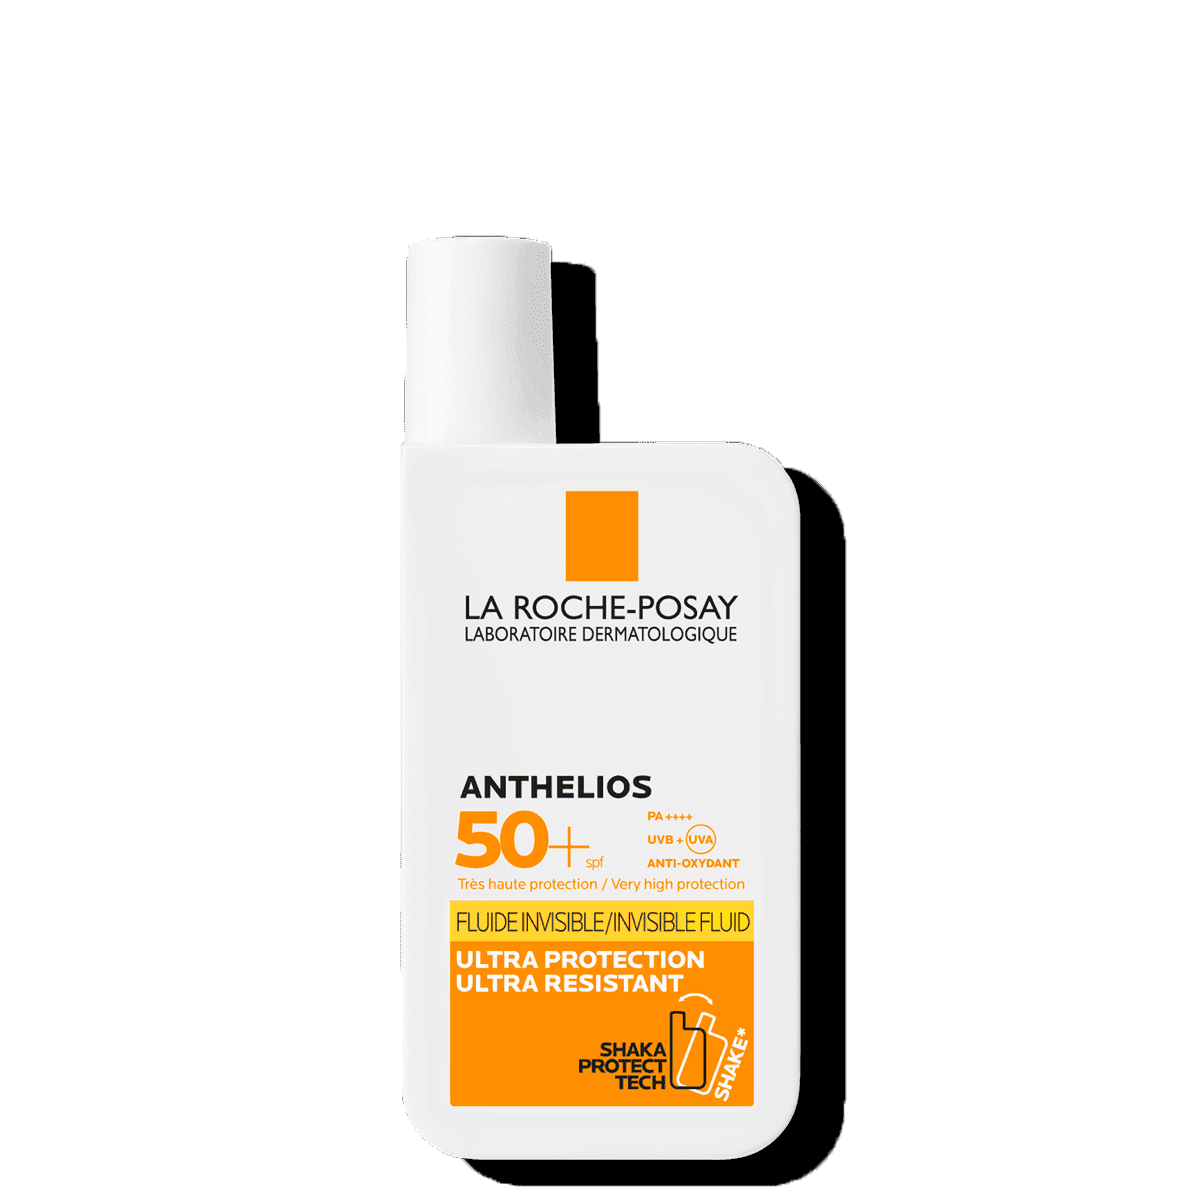 Buy La Roche Posay Anthelios Ultra Light Invisible Fluid SPF50 - 50ml in Pakistan